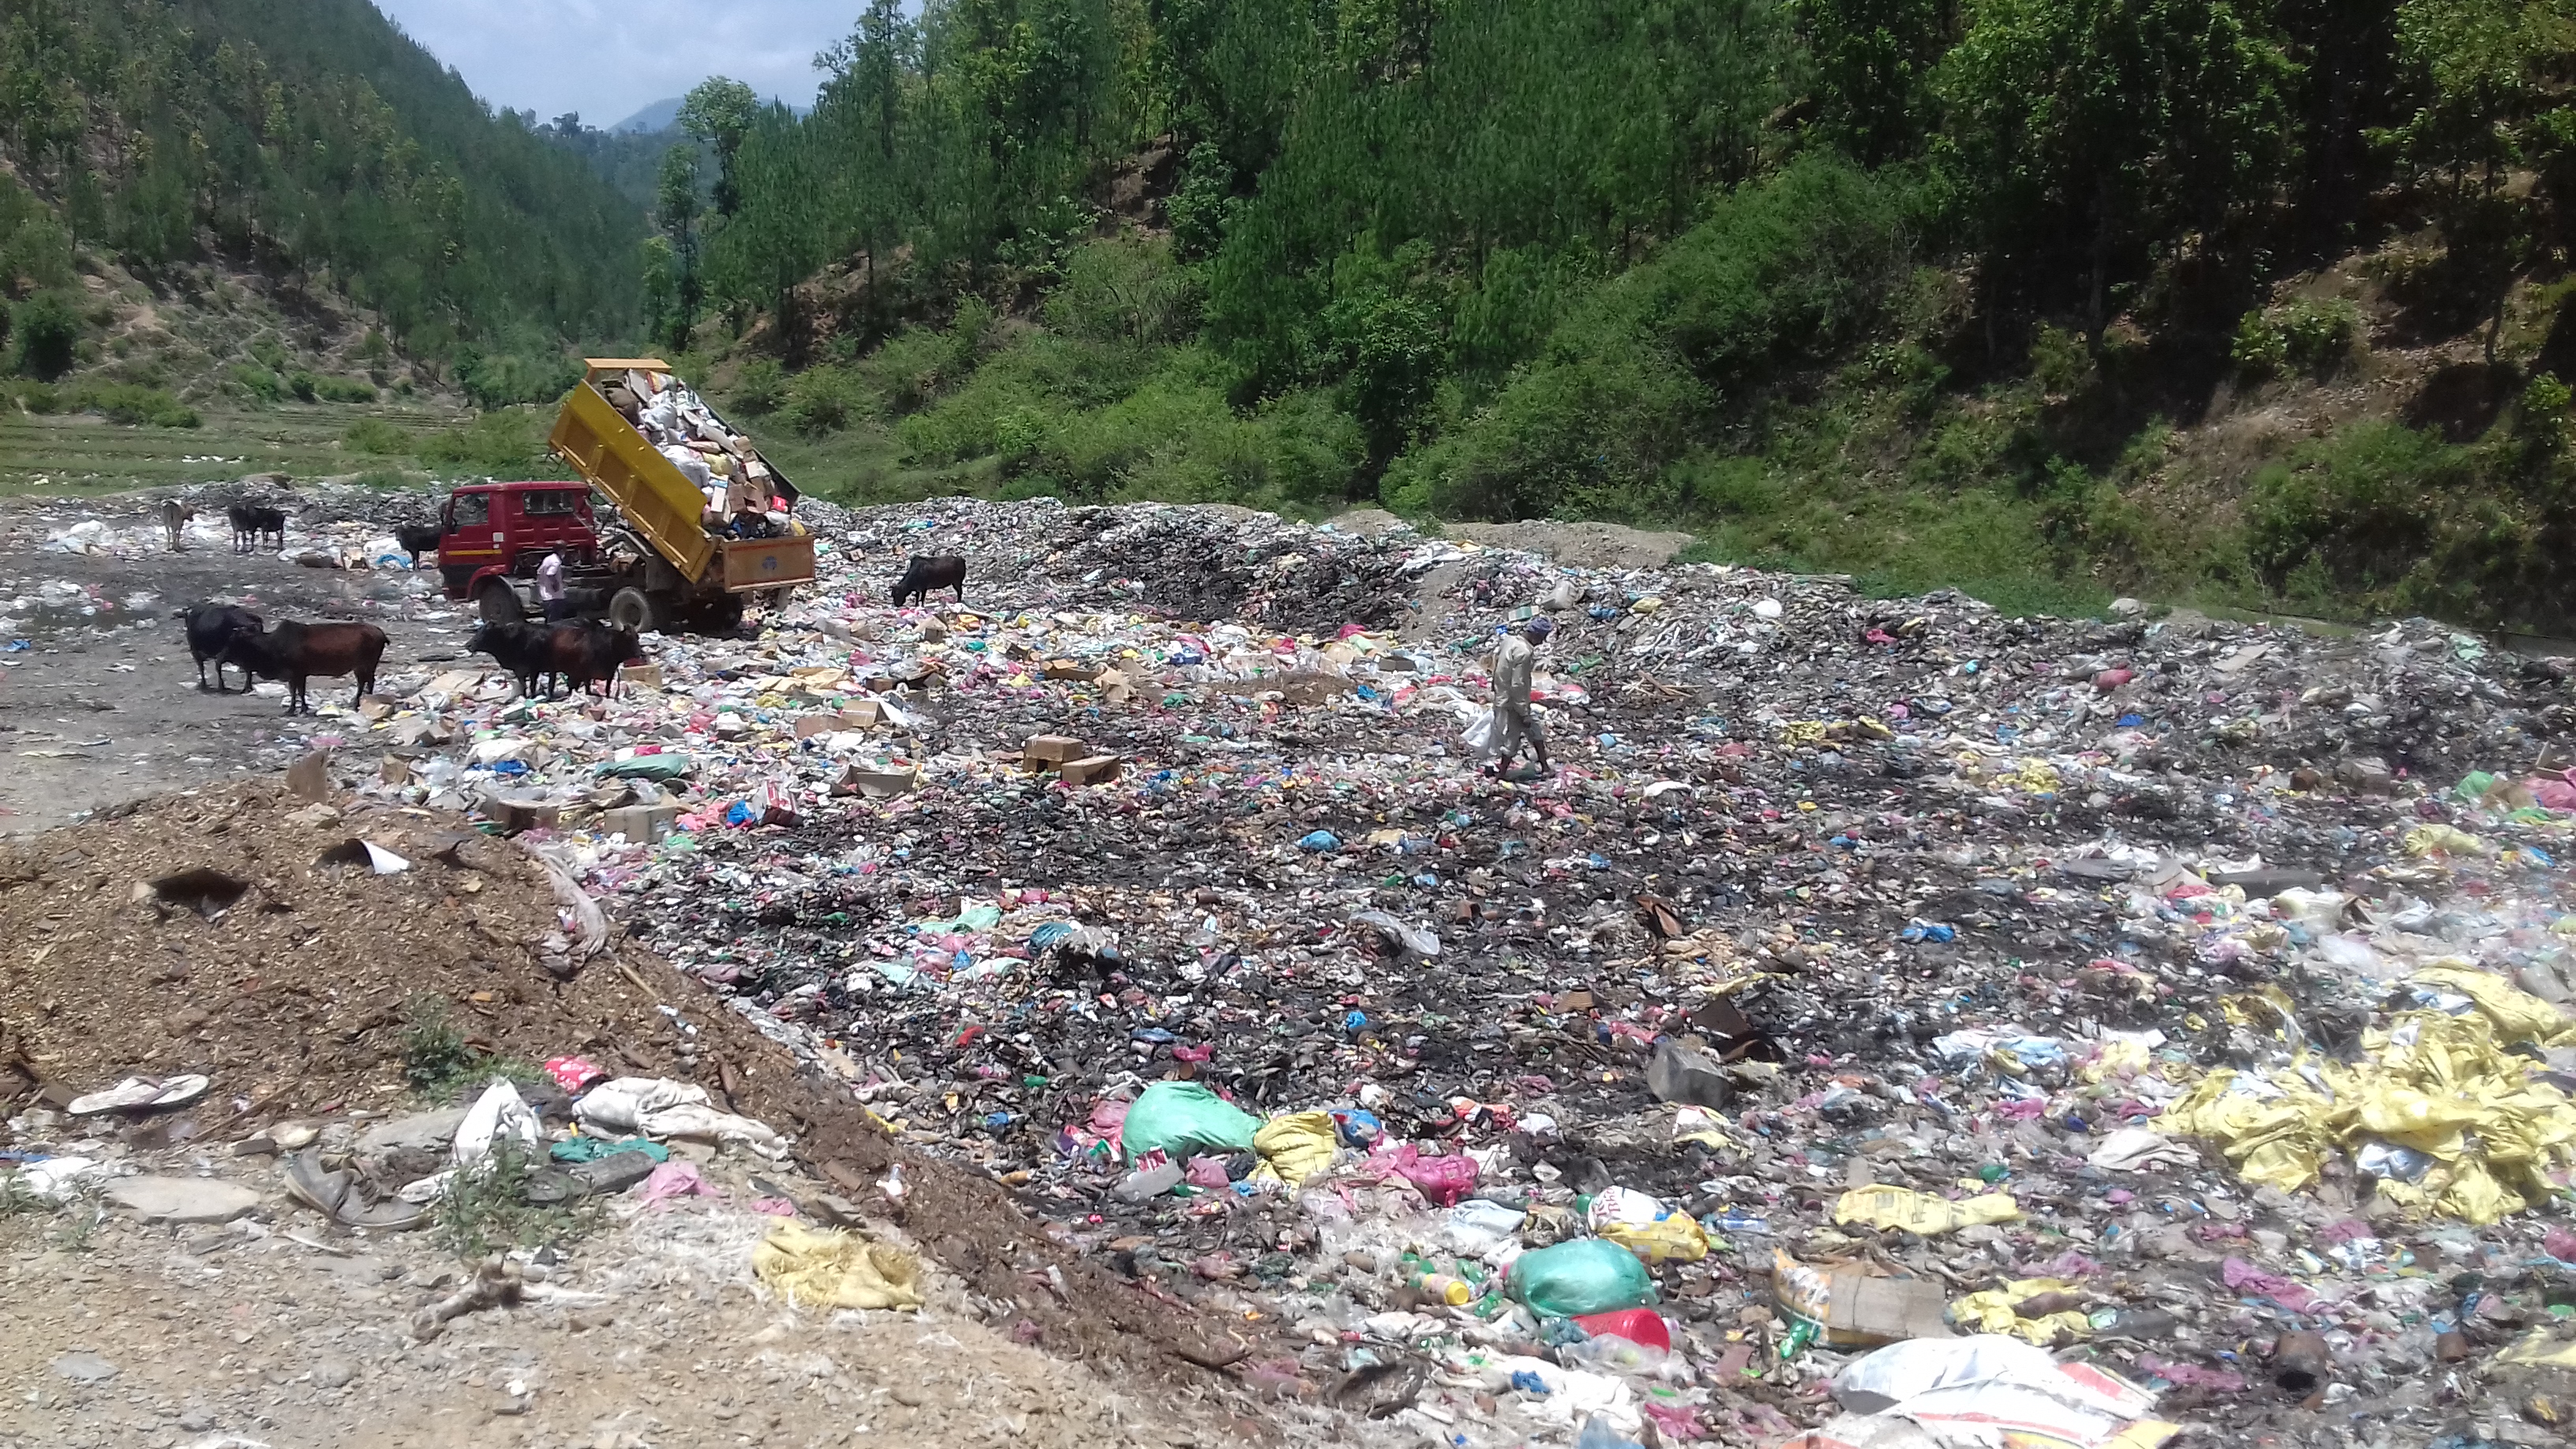 Dumping site spoils beauty of Sandhikharka (with photos)